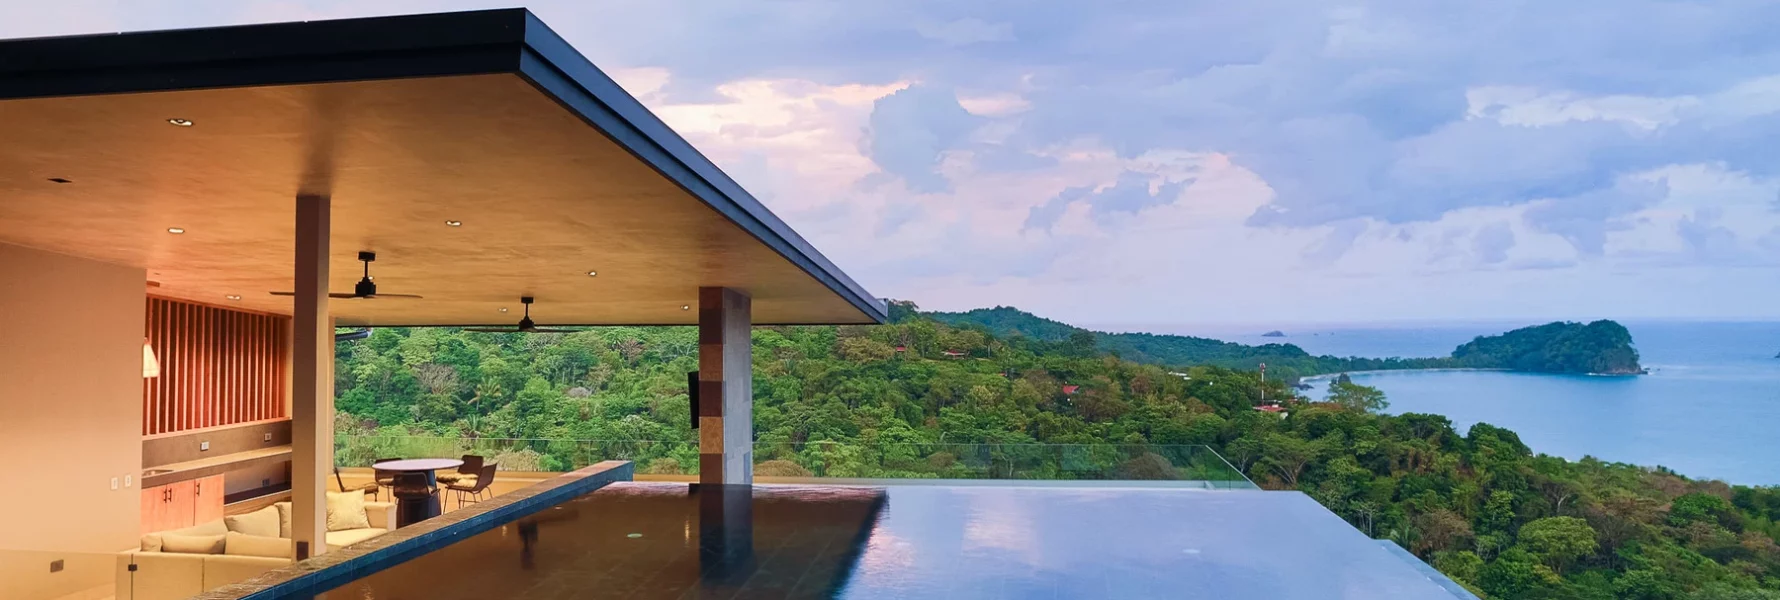 This luxurious rooftop infinity saltwater pool floats high above the rainforest overlooking the Pacific.